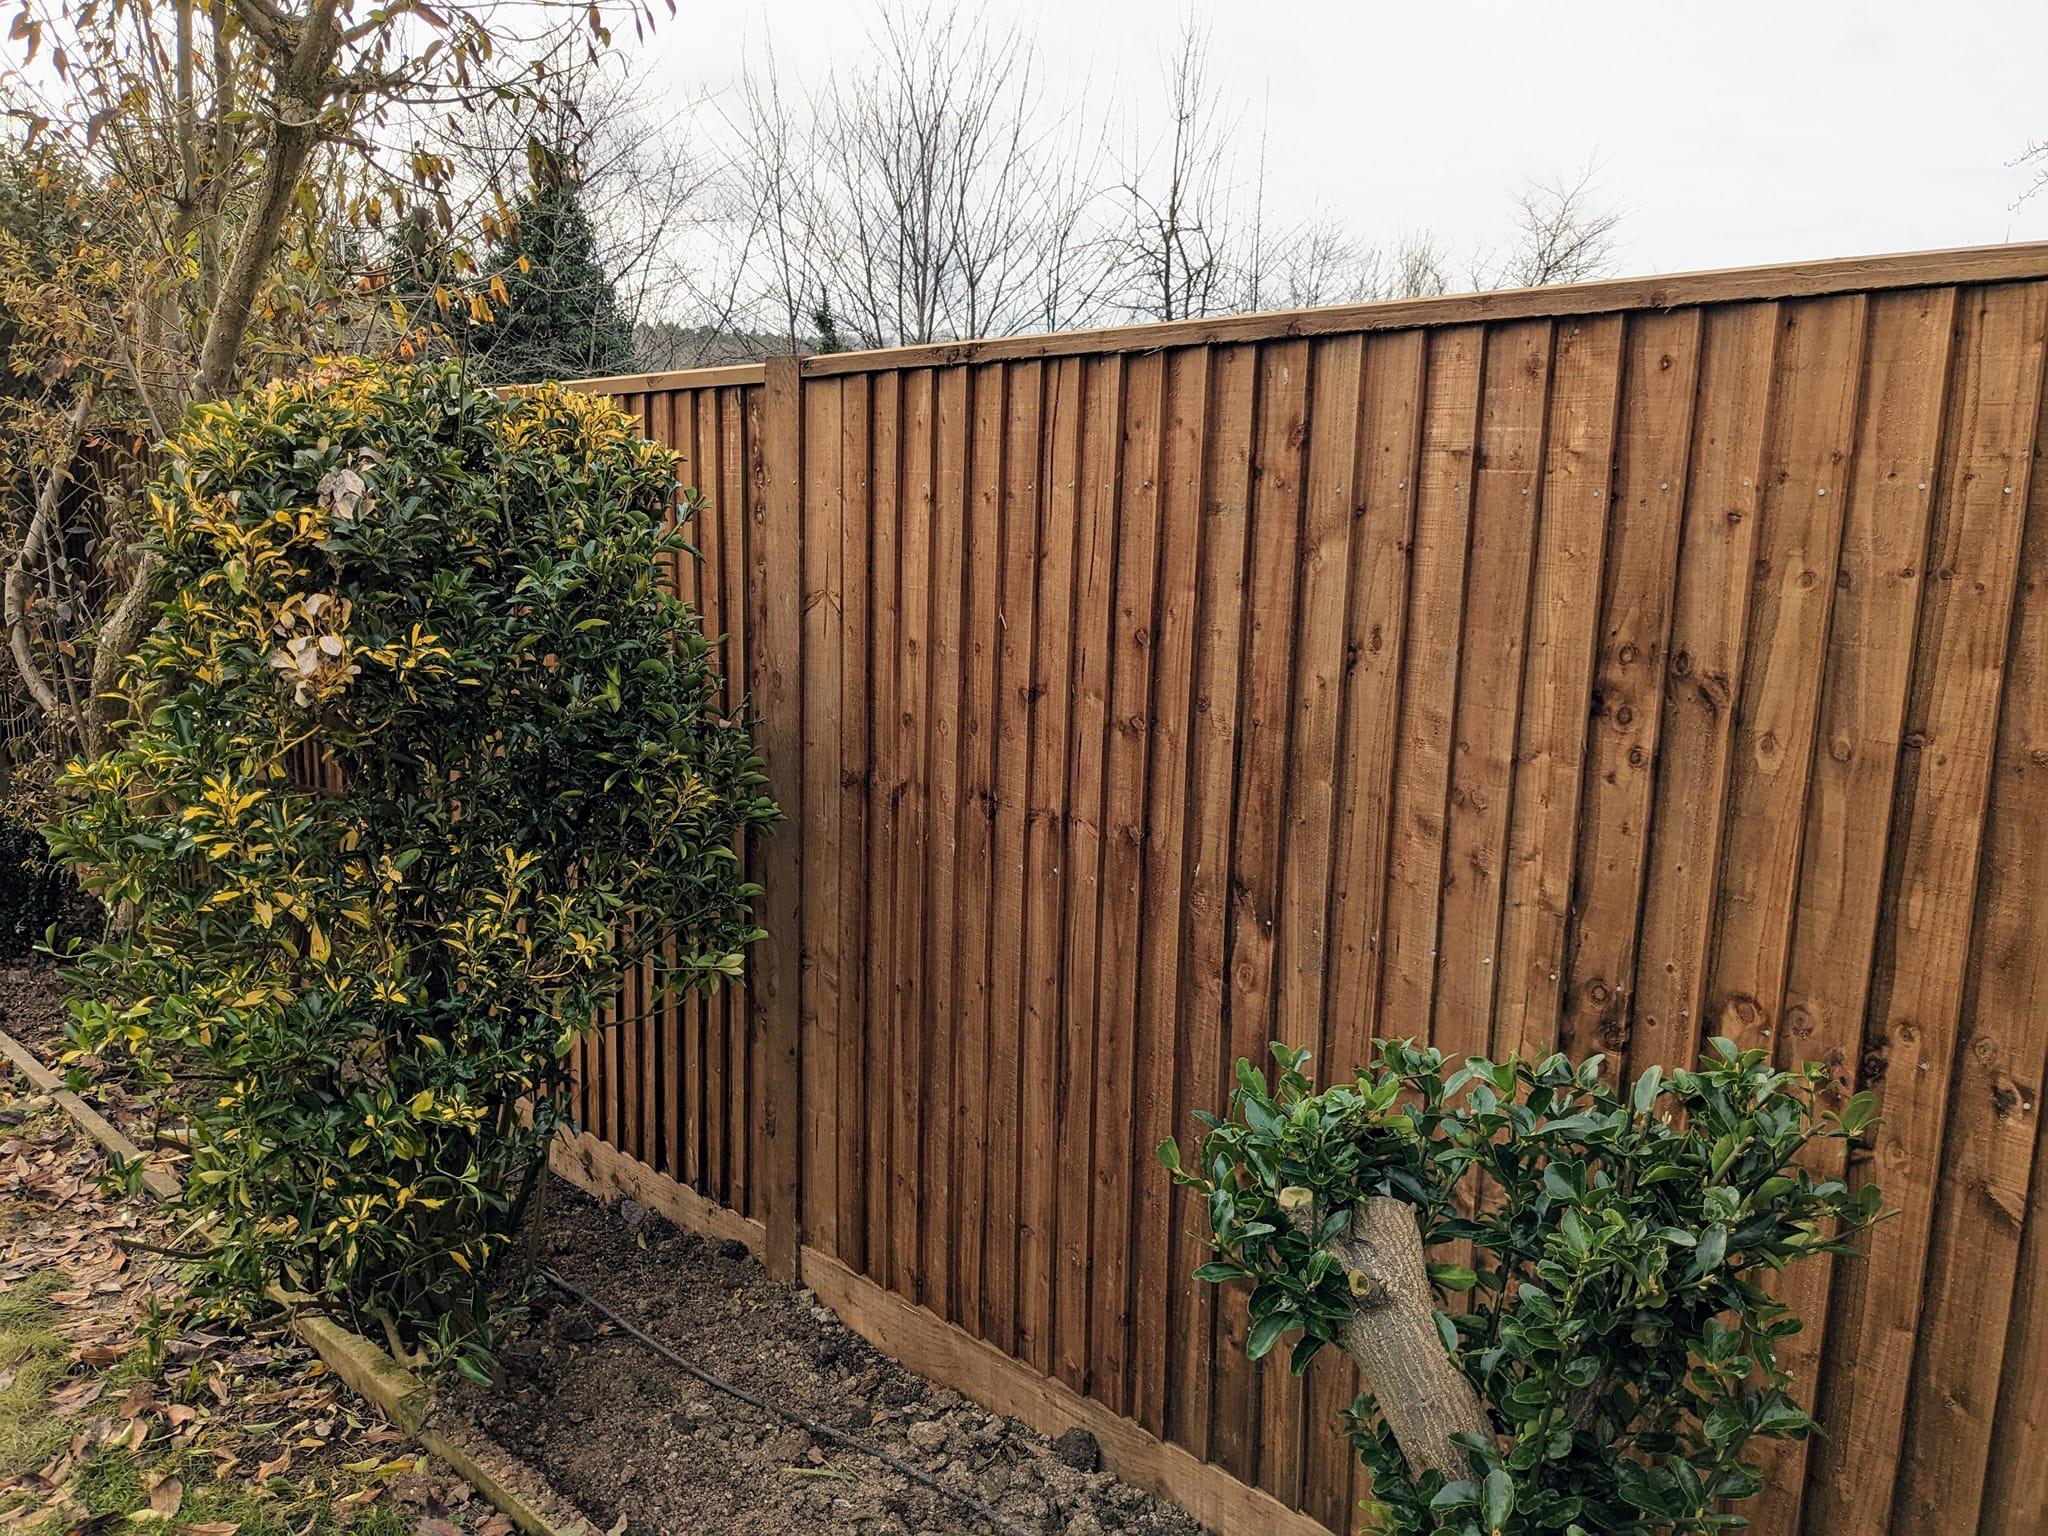 Fencing installed on Cuxton